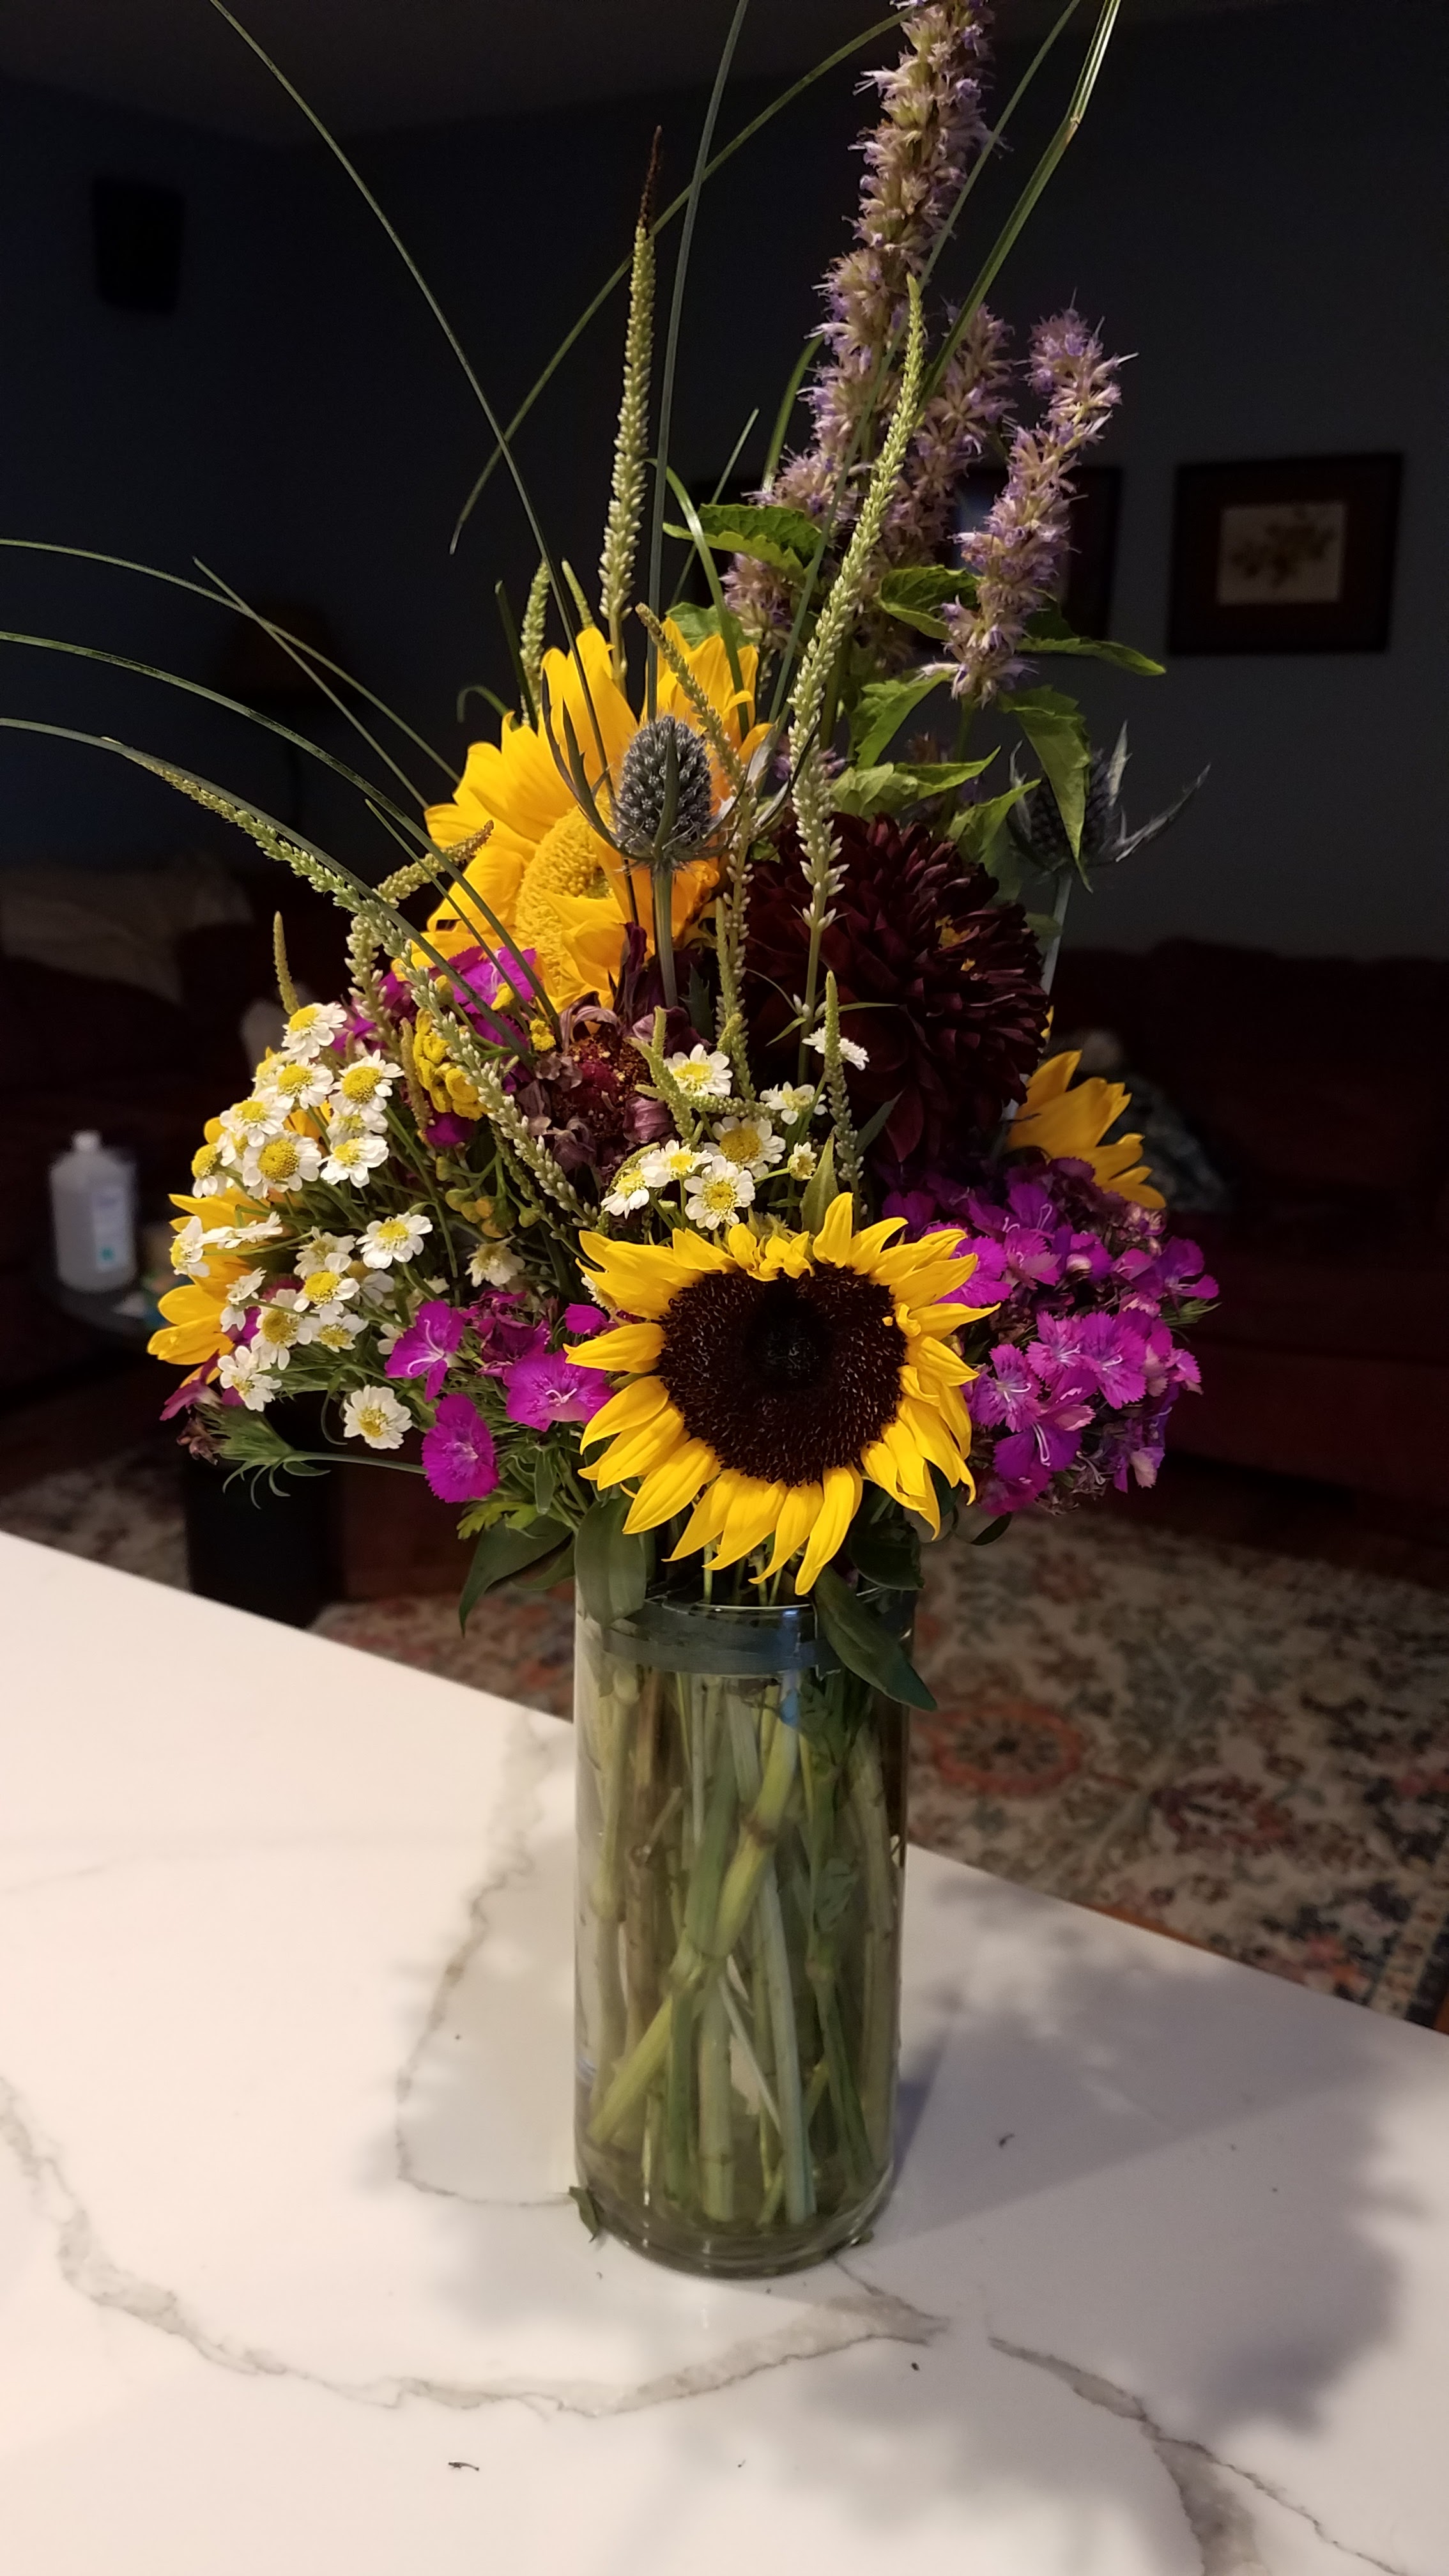 Flower vase with colorful flowers in it